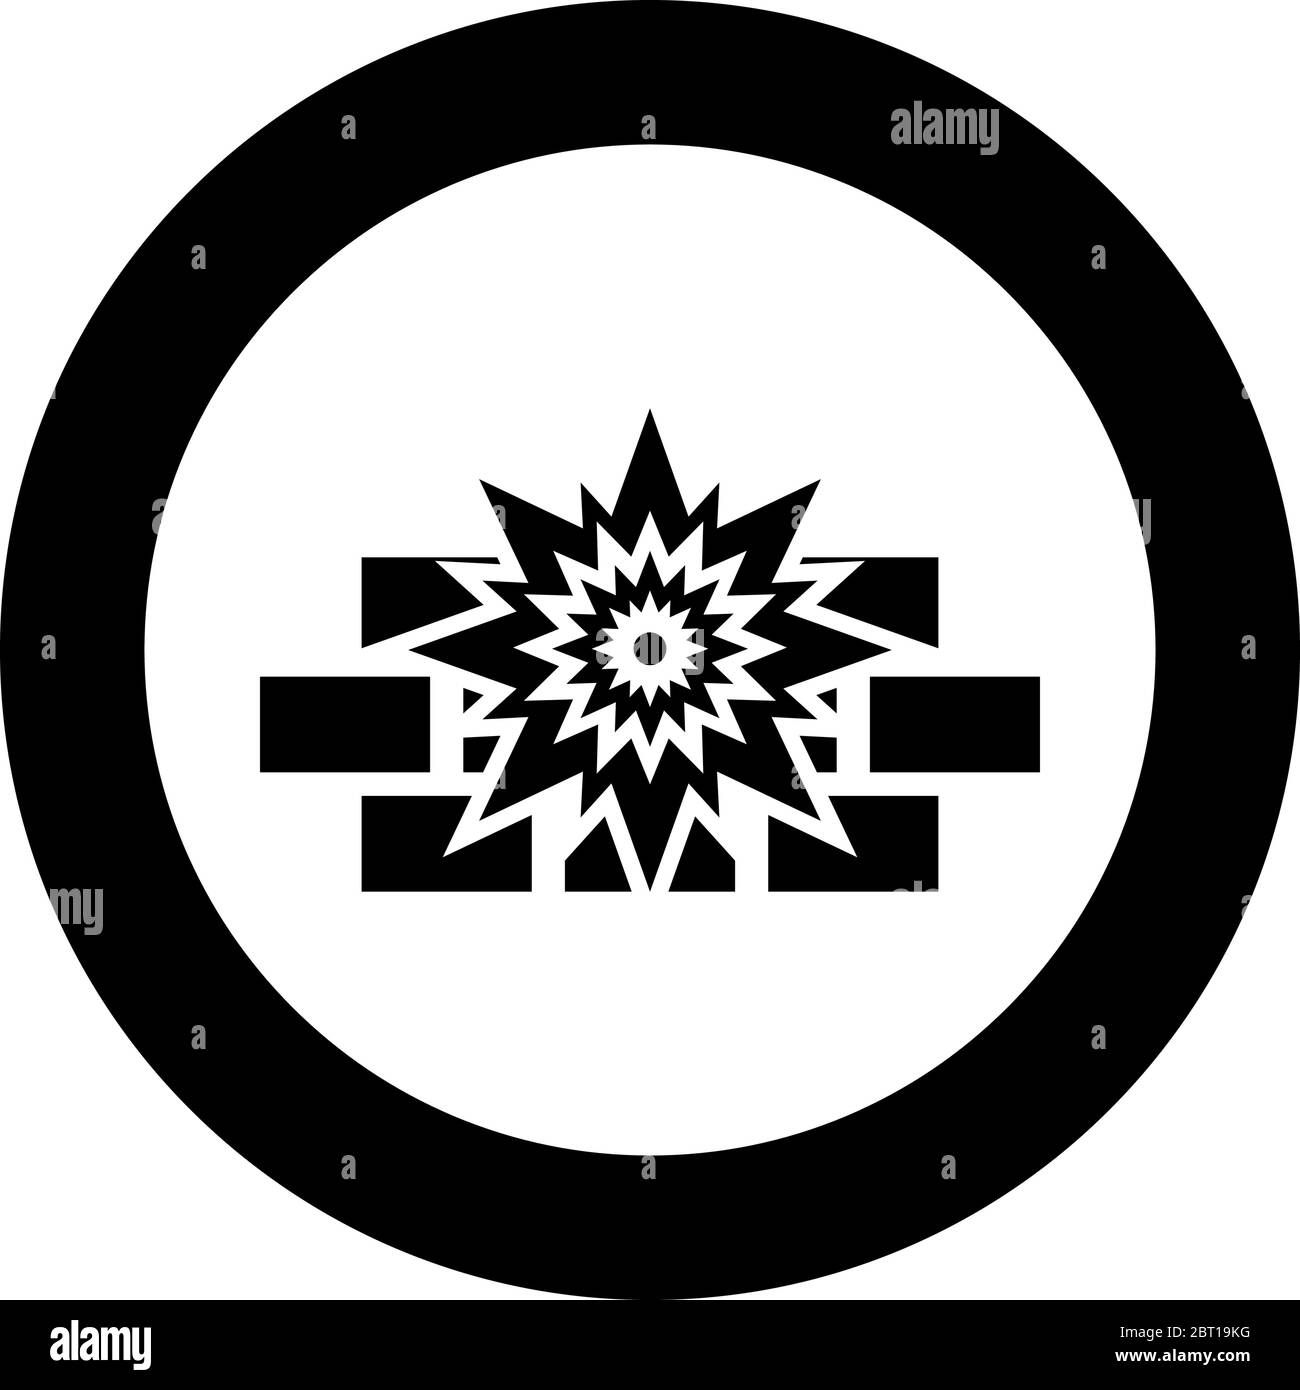 Explosion brick wall icon in circle round black color vector illustration flat style simple image Stock Vector